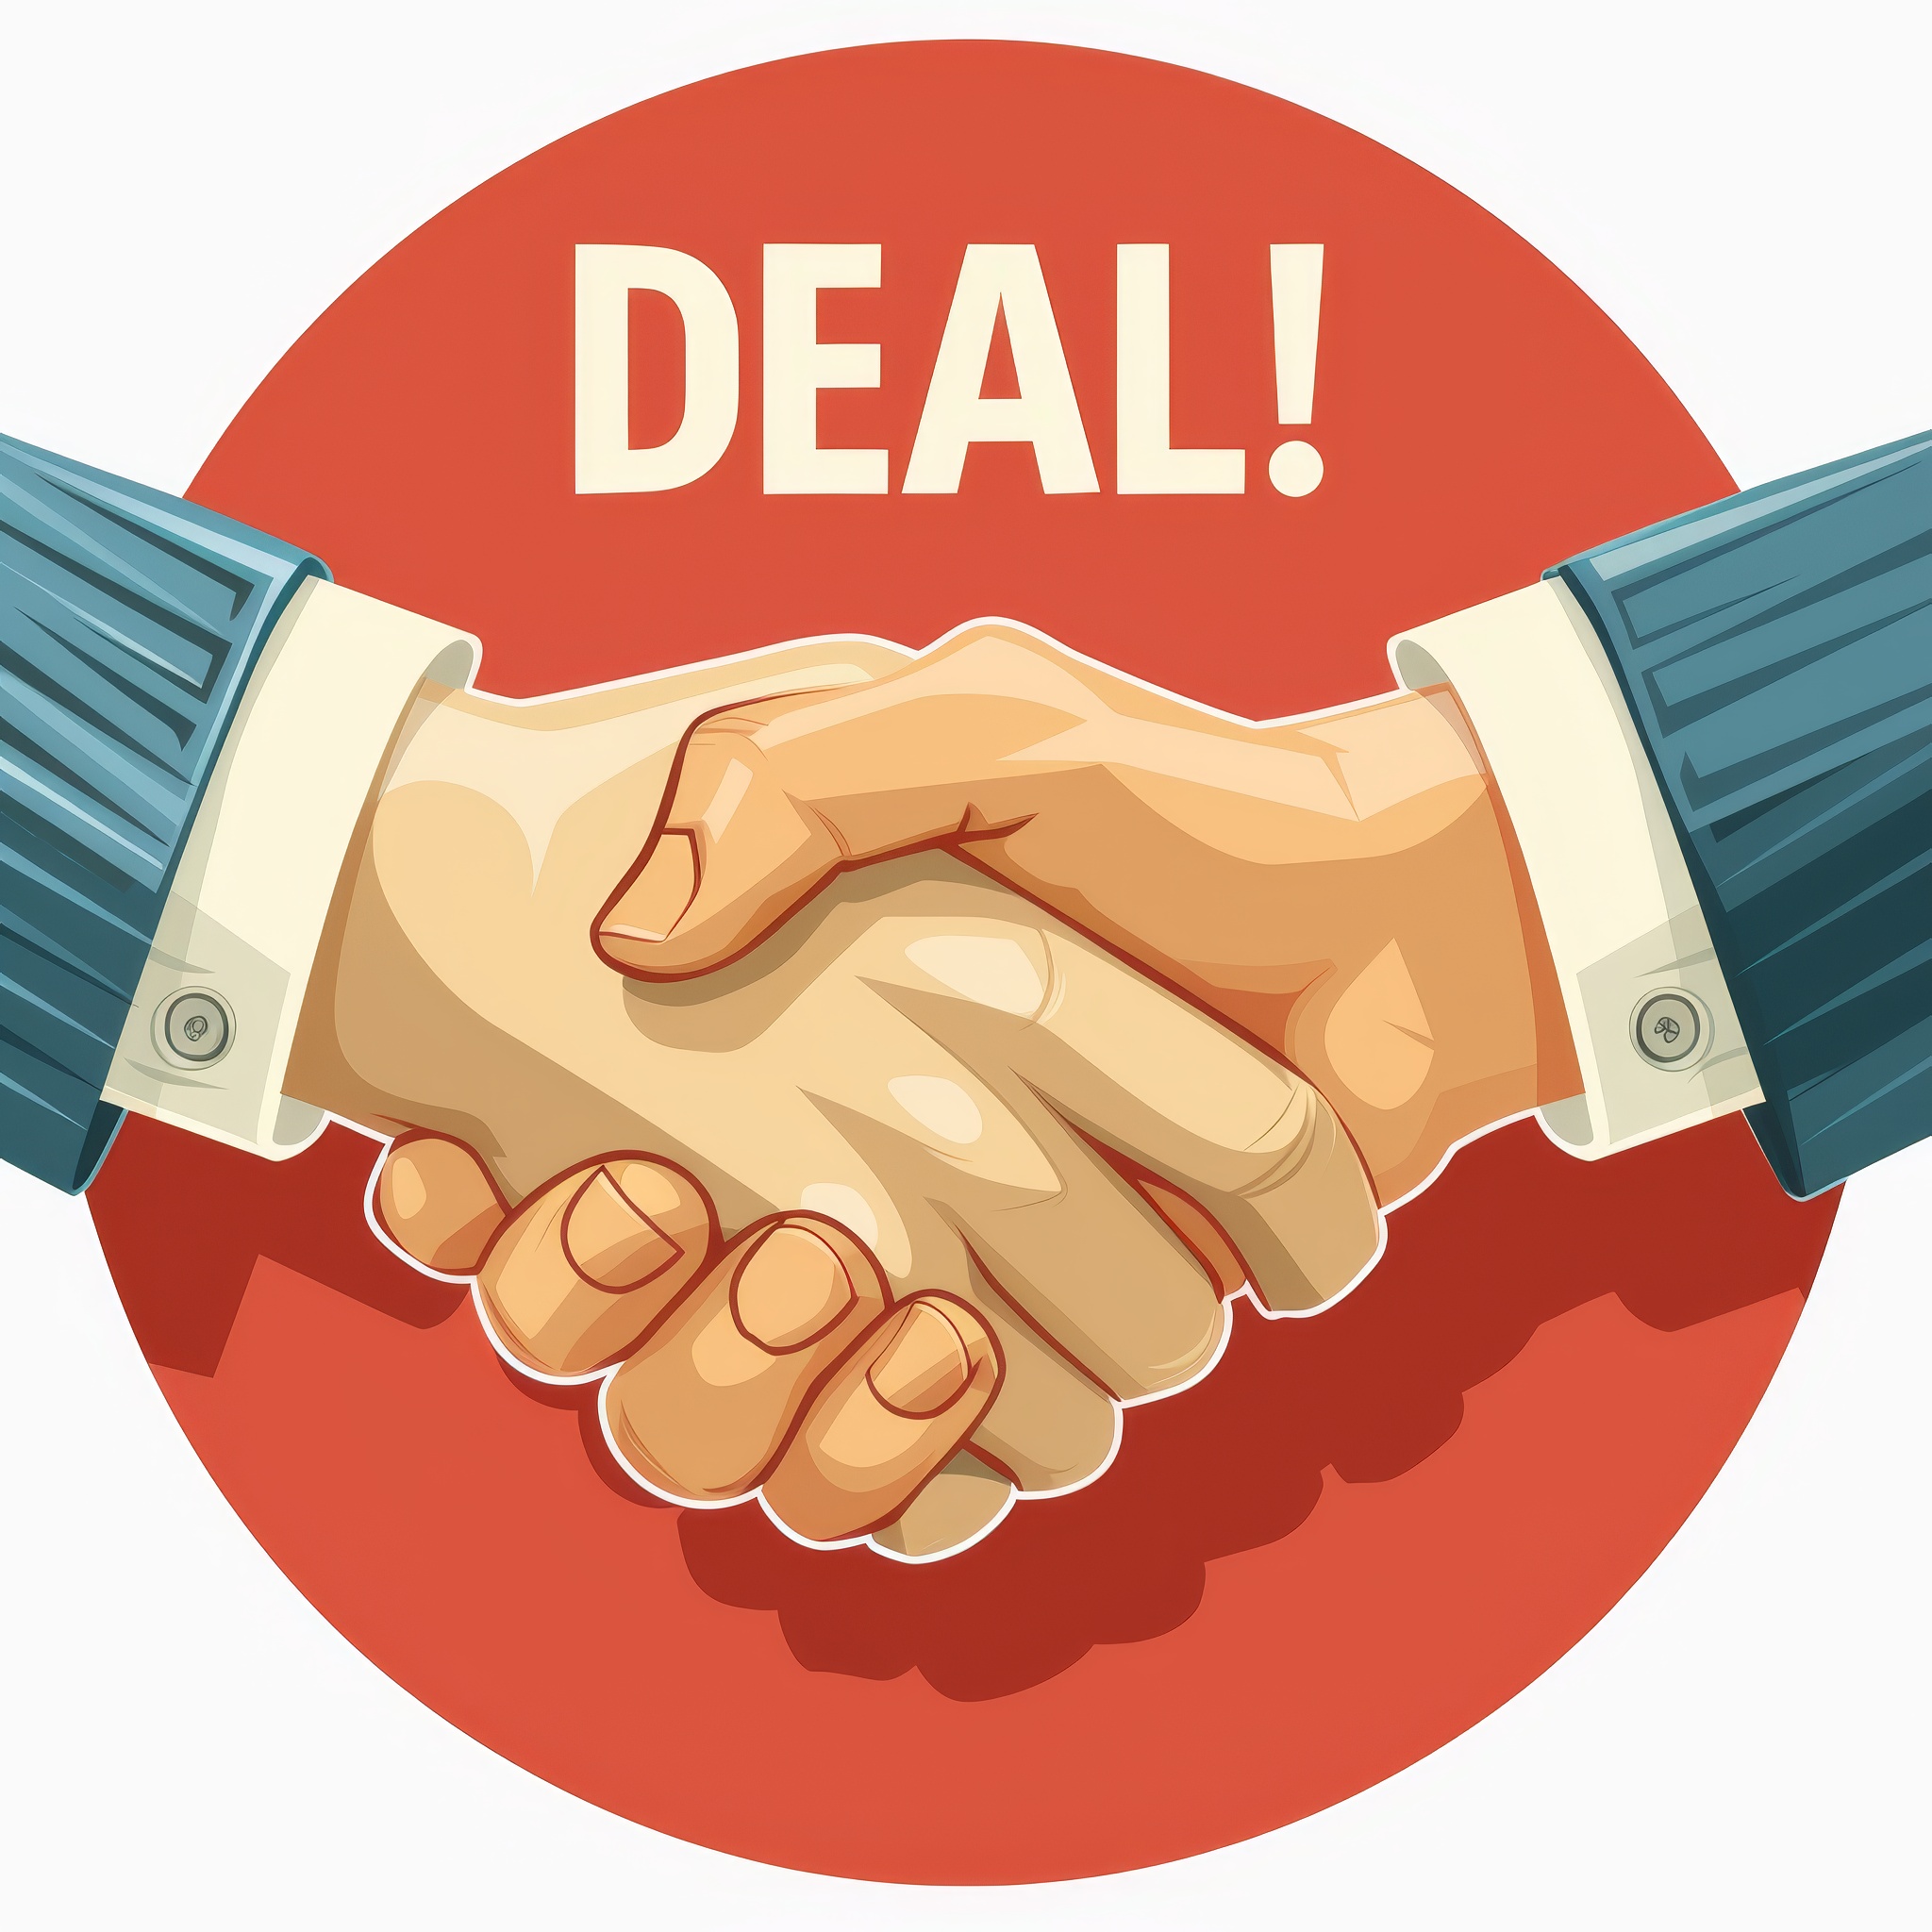 Business deal, Shaking hand as business agreement concept